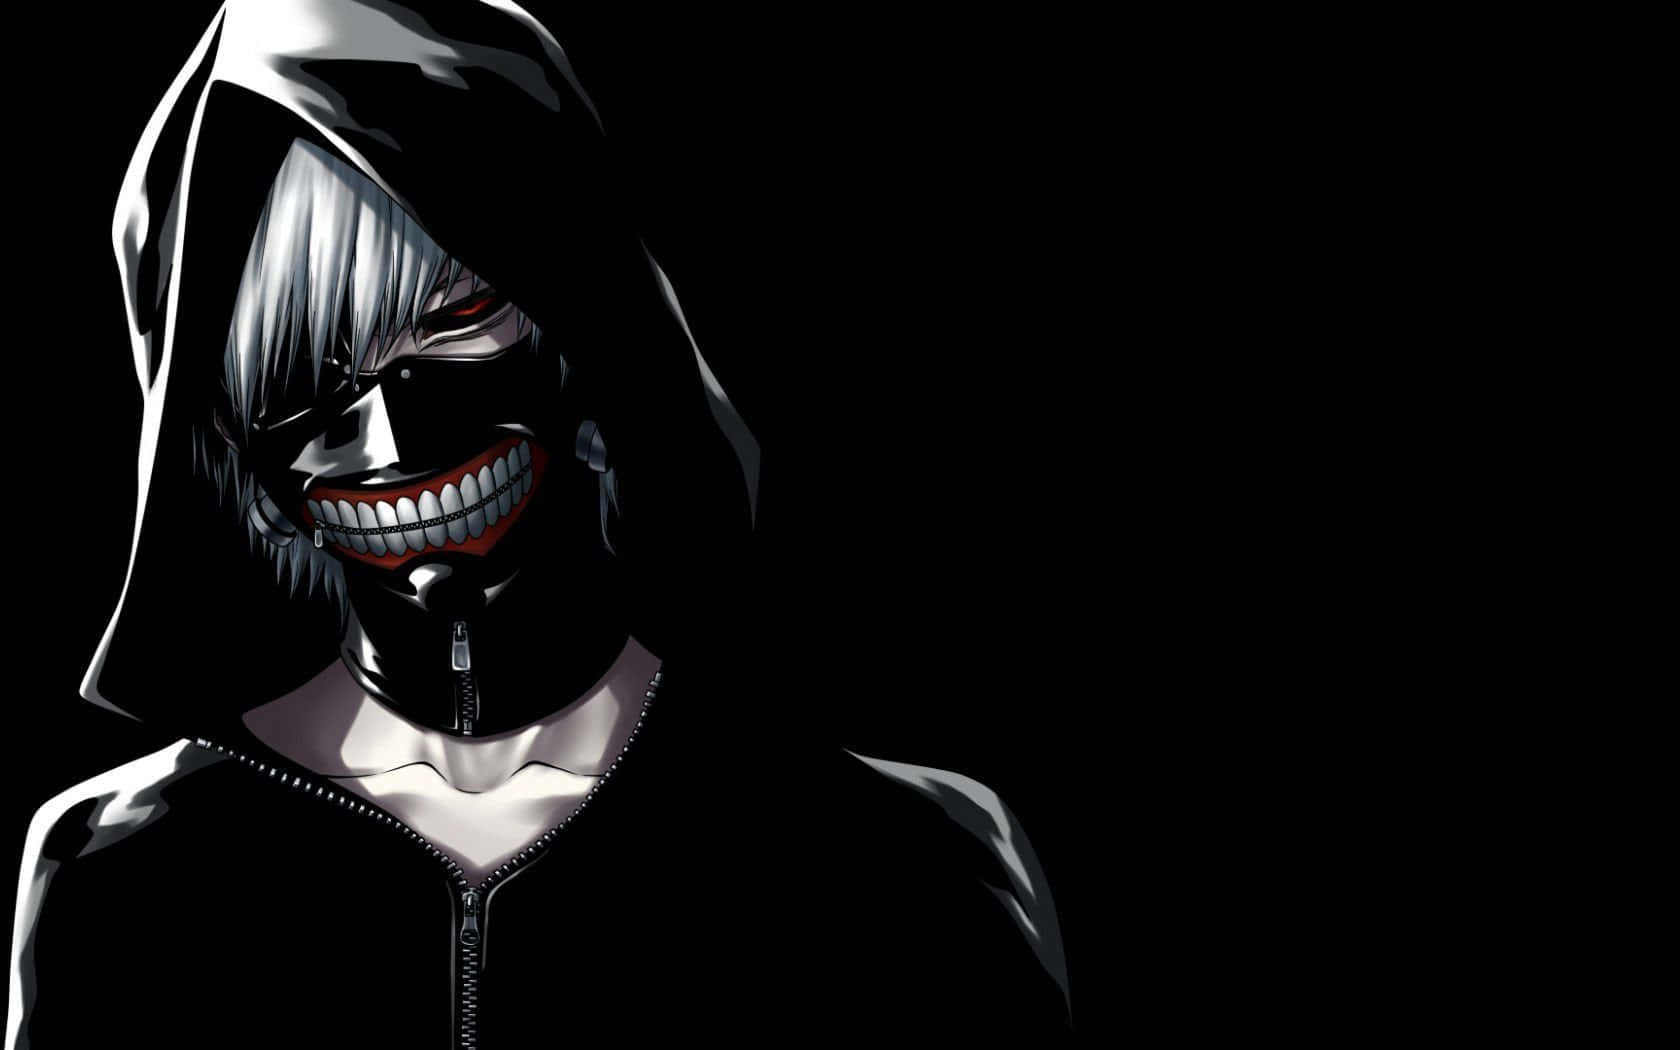 Free Tokyo Ghoul Wallpaper Downloads, [200+] Tokyo Ghoul Wallpapers for  FREE 